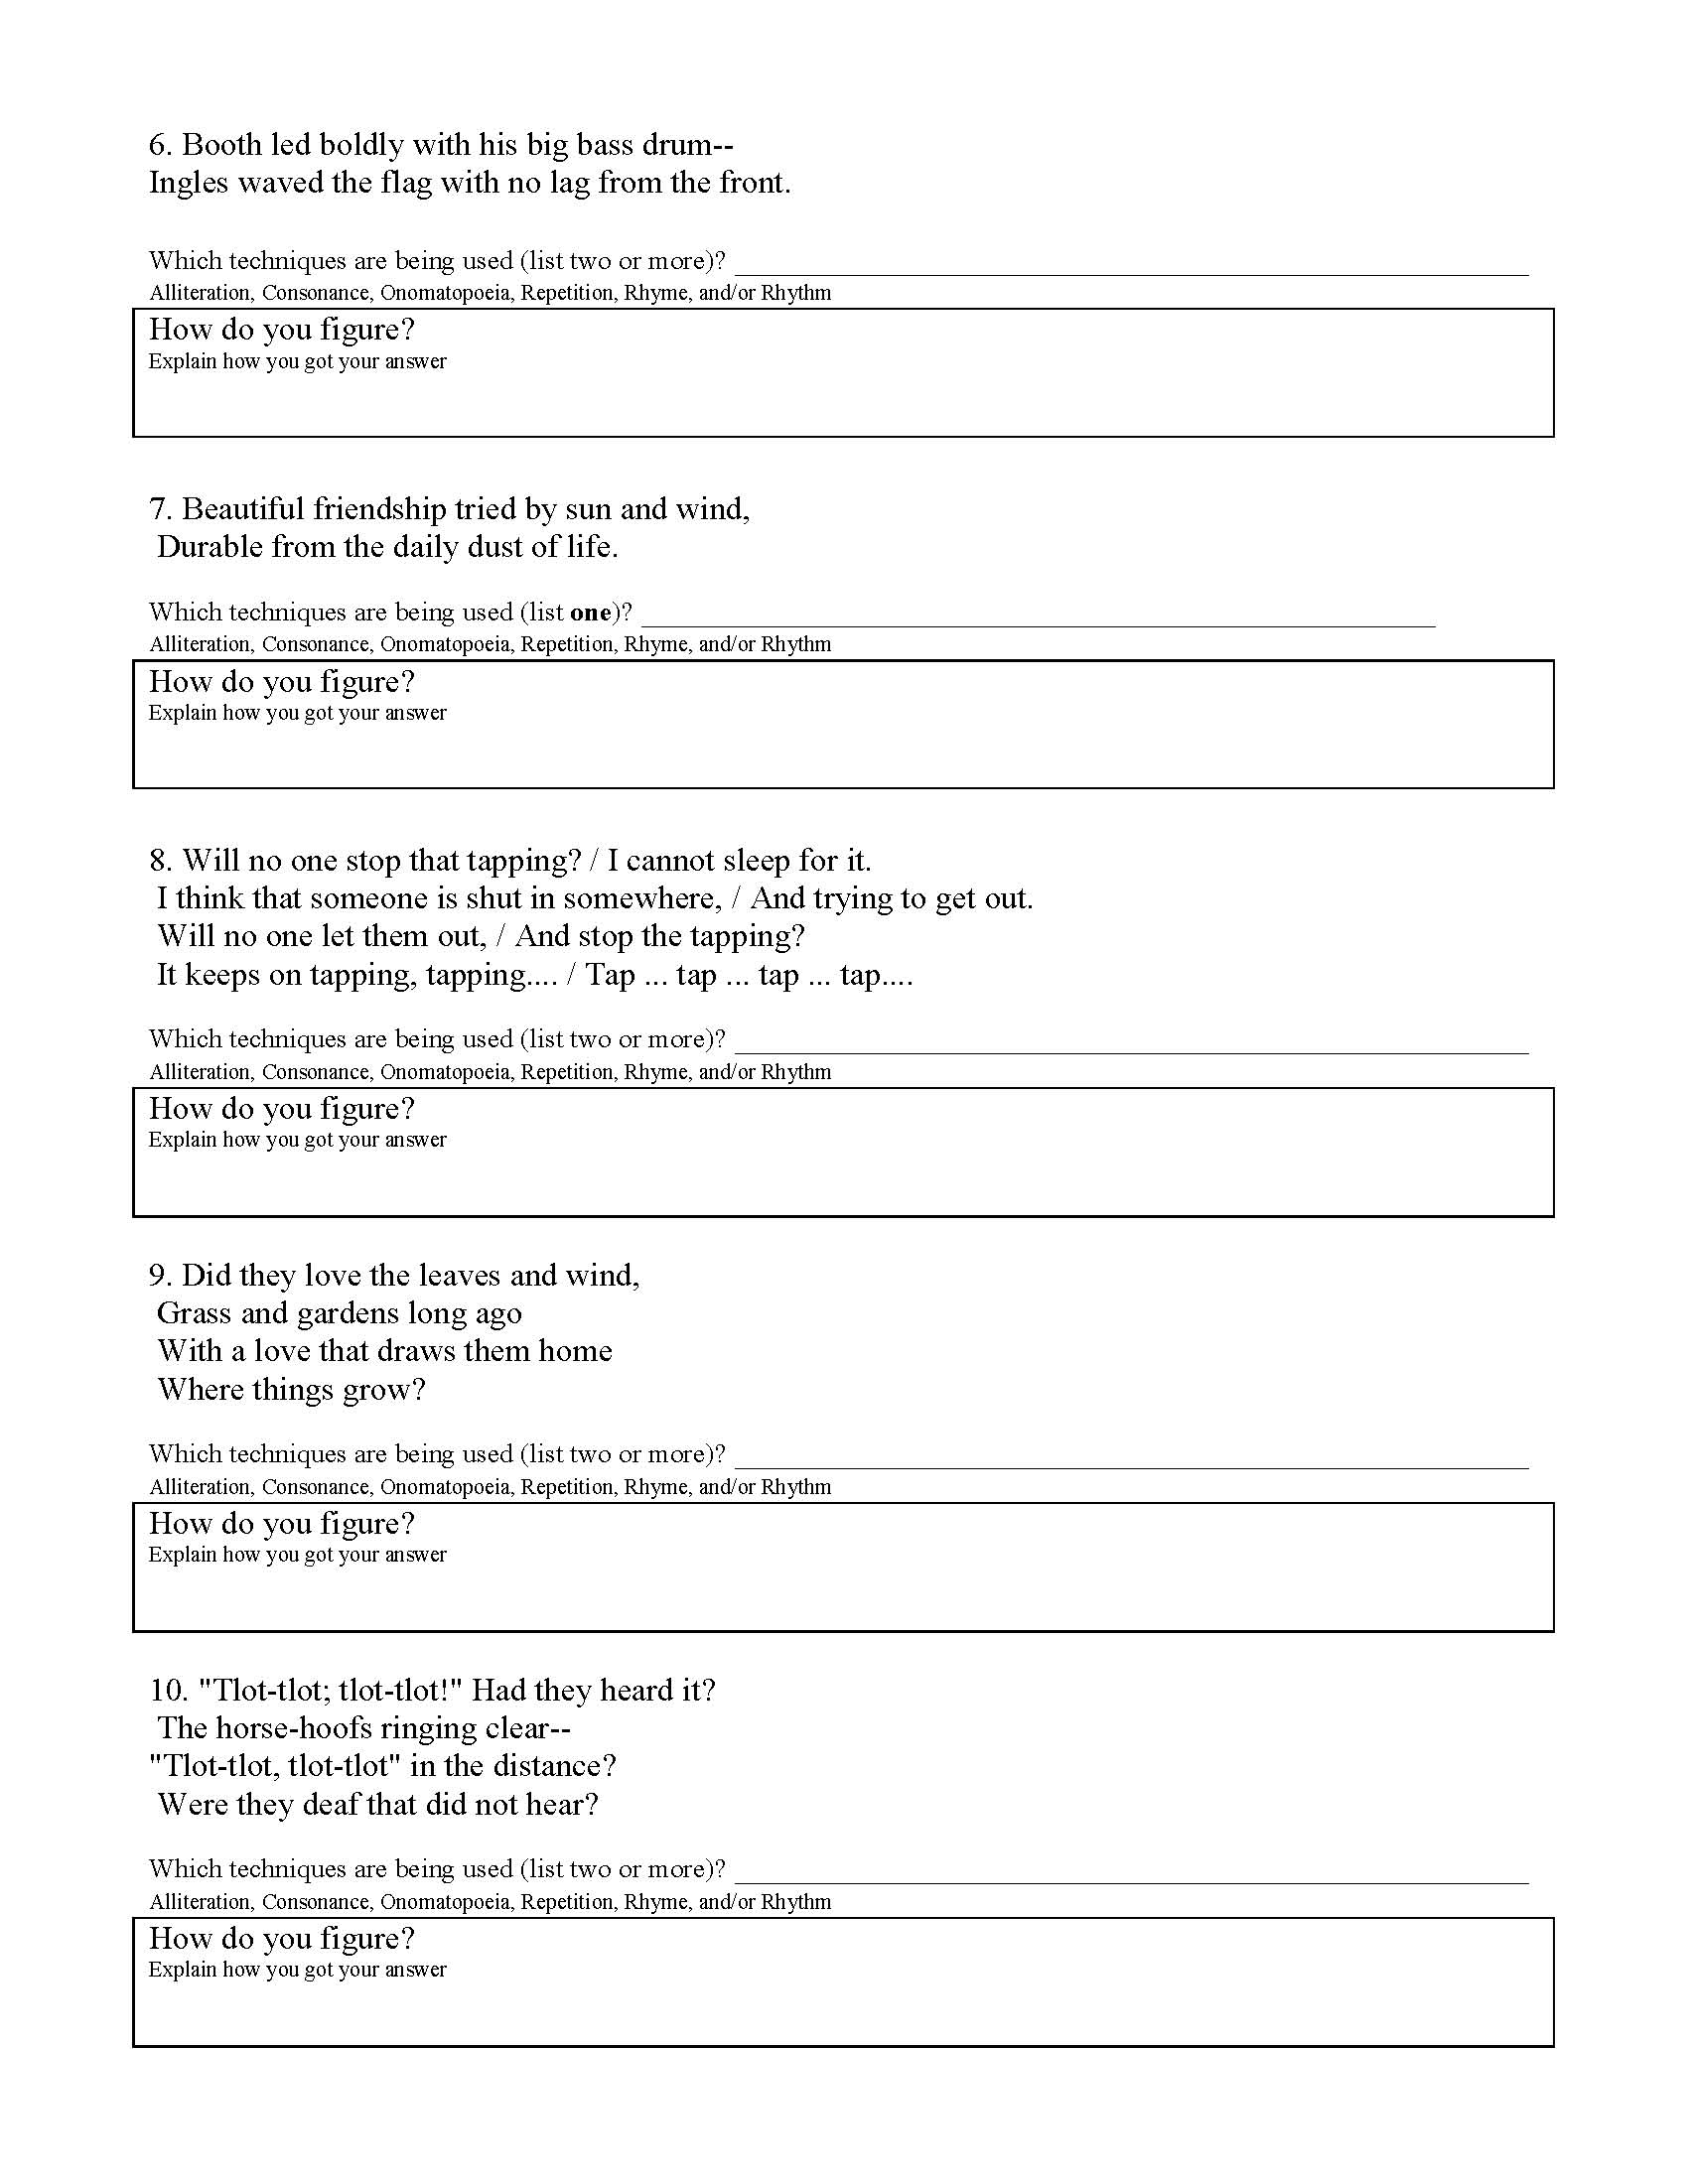 Poetic Devices Worksheet ~ 22+ images 22 poetic devices worksheet For Literary Devices Worksheet Pdf